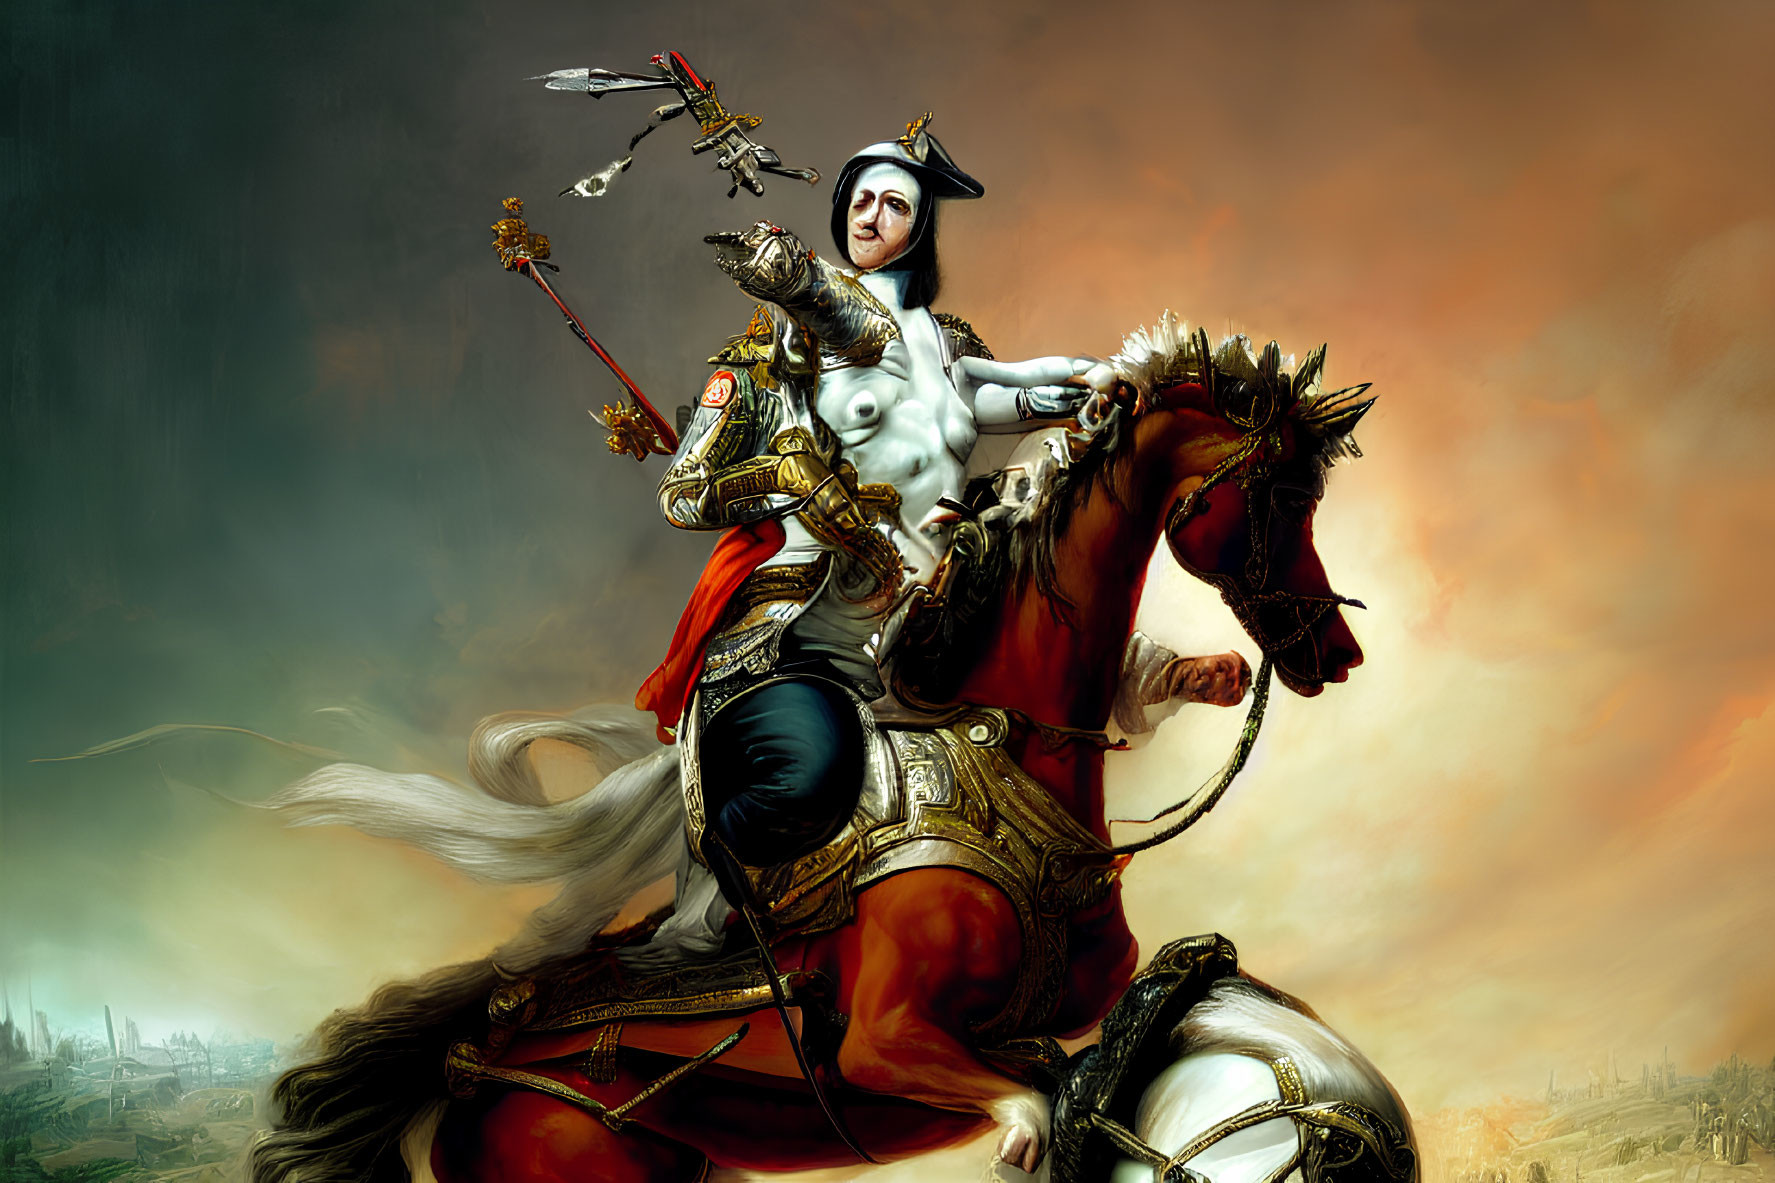 Female warrior in armor on rearing horse with spear in smoky battlefield